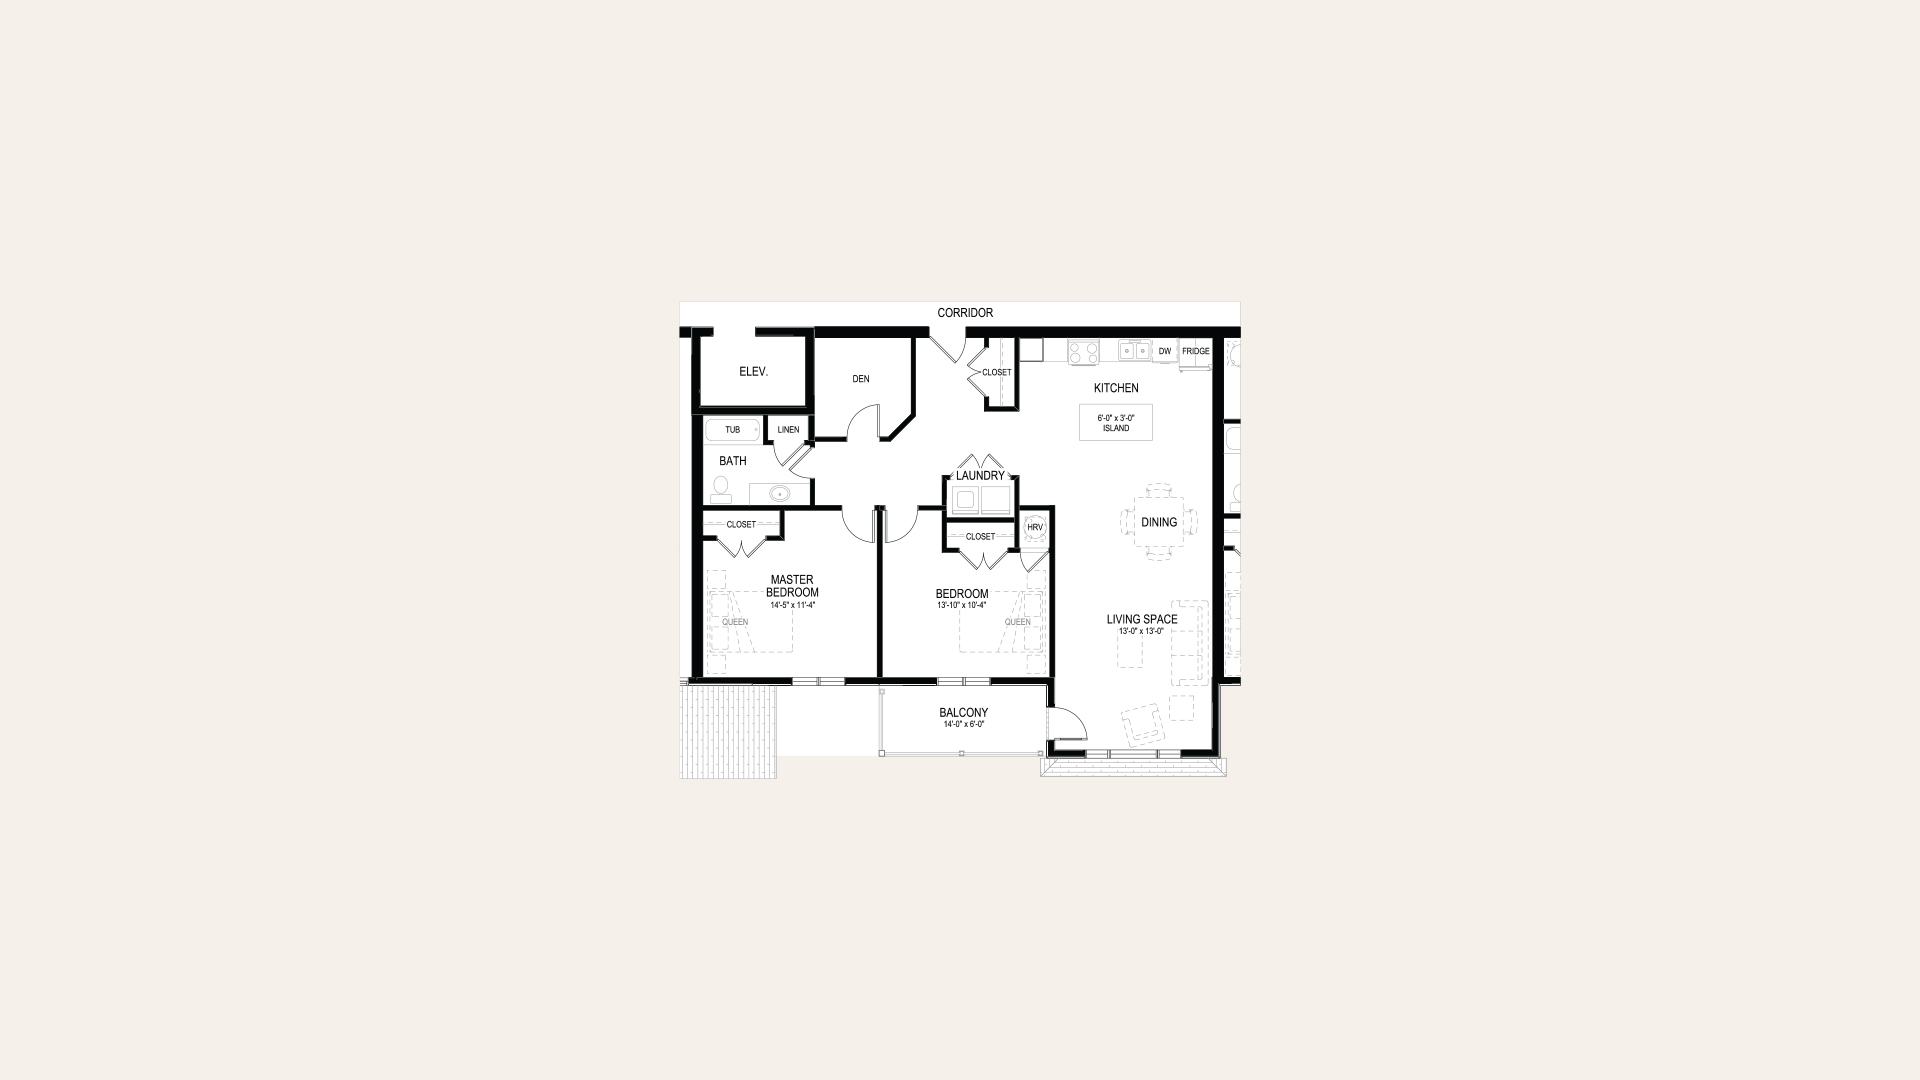 Floor plan of apartment E in Building A. Two bedrooms, one bathroom, one den, laundry closet, balcony, and an open concept kitchen and living room.